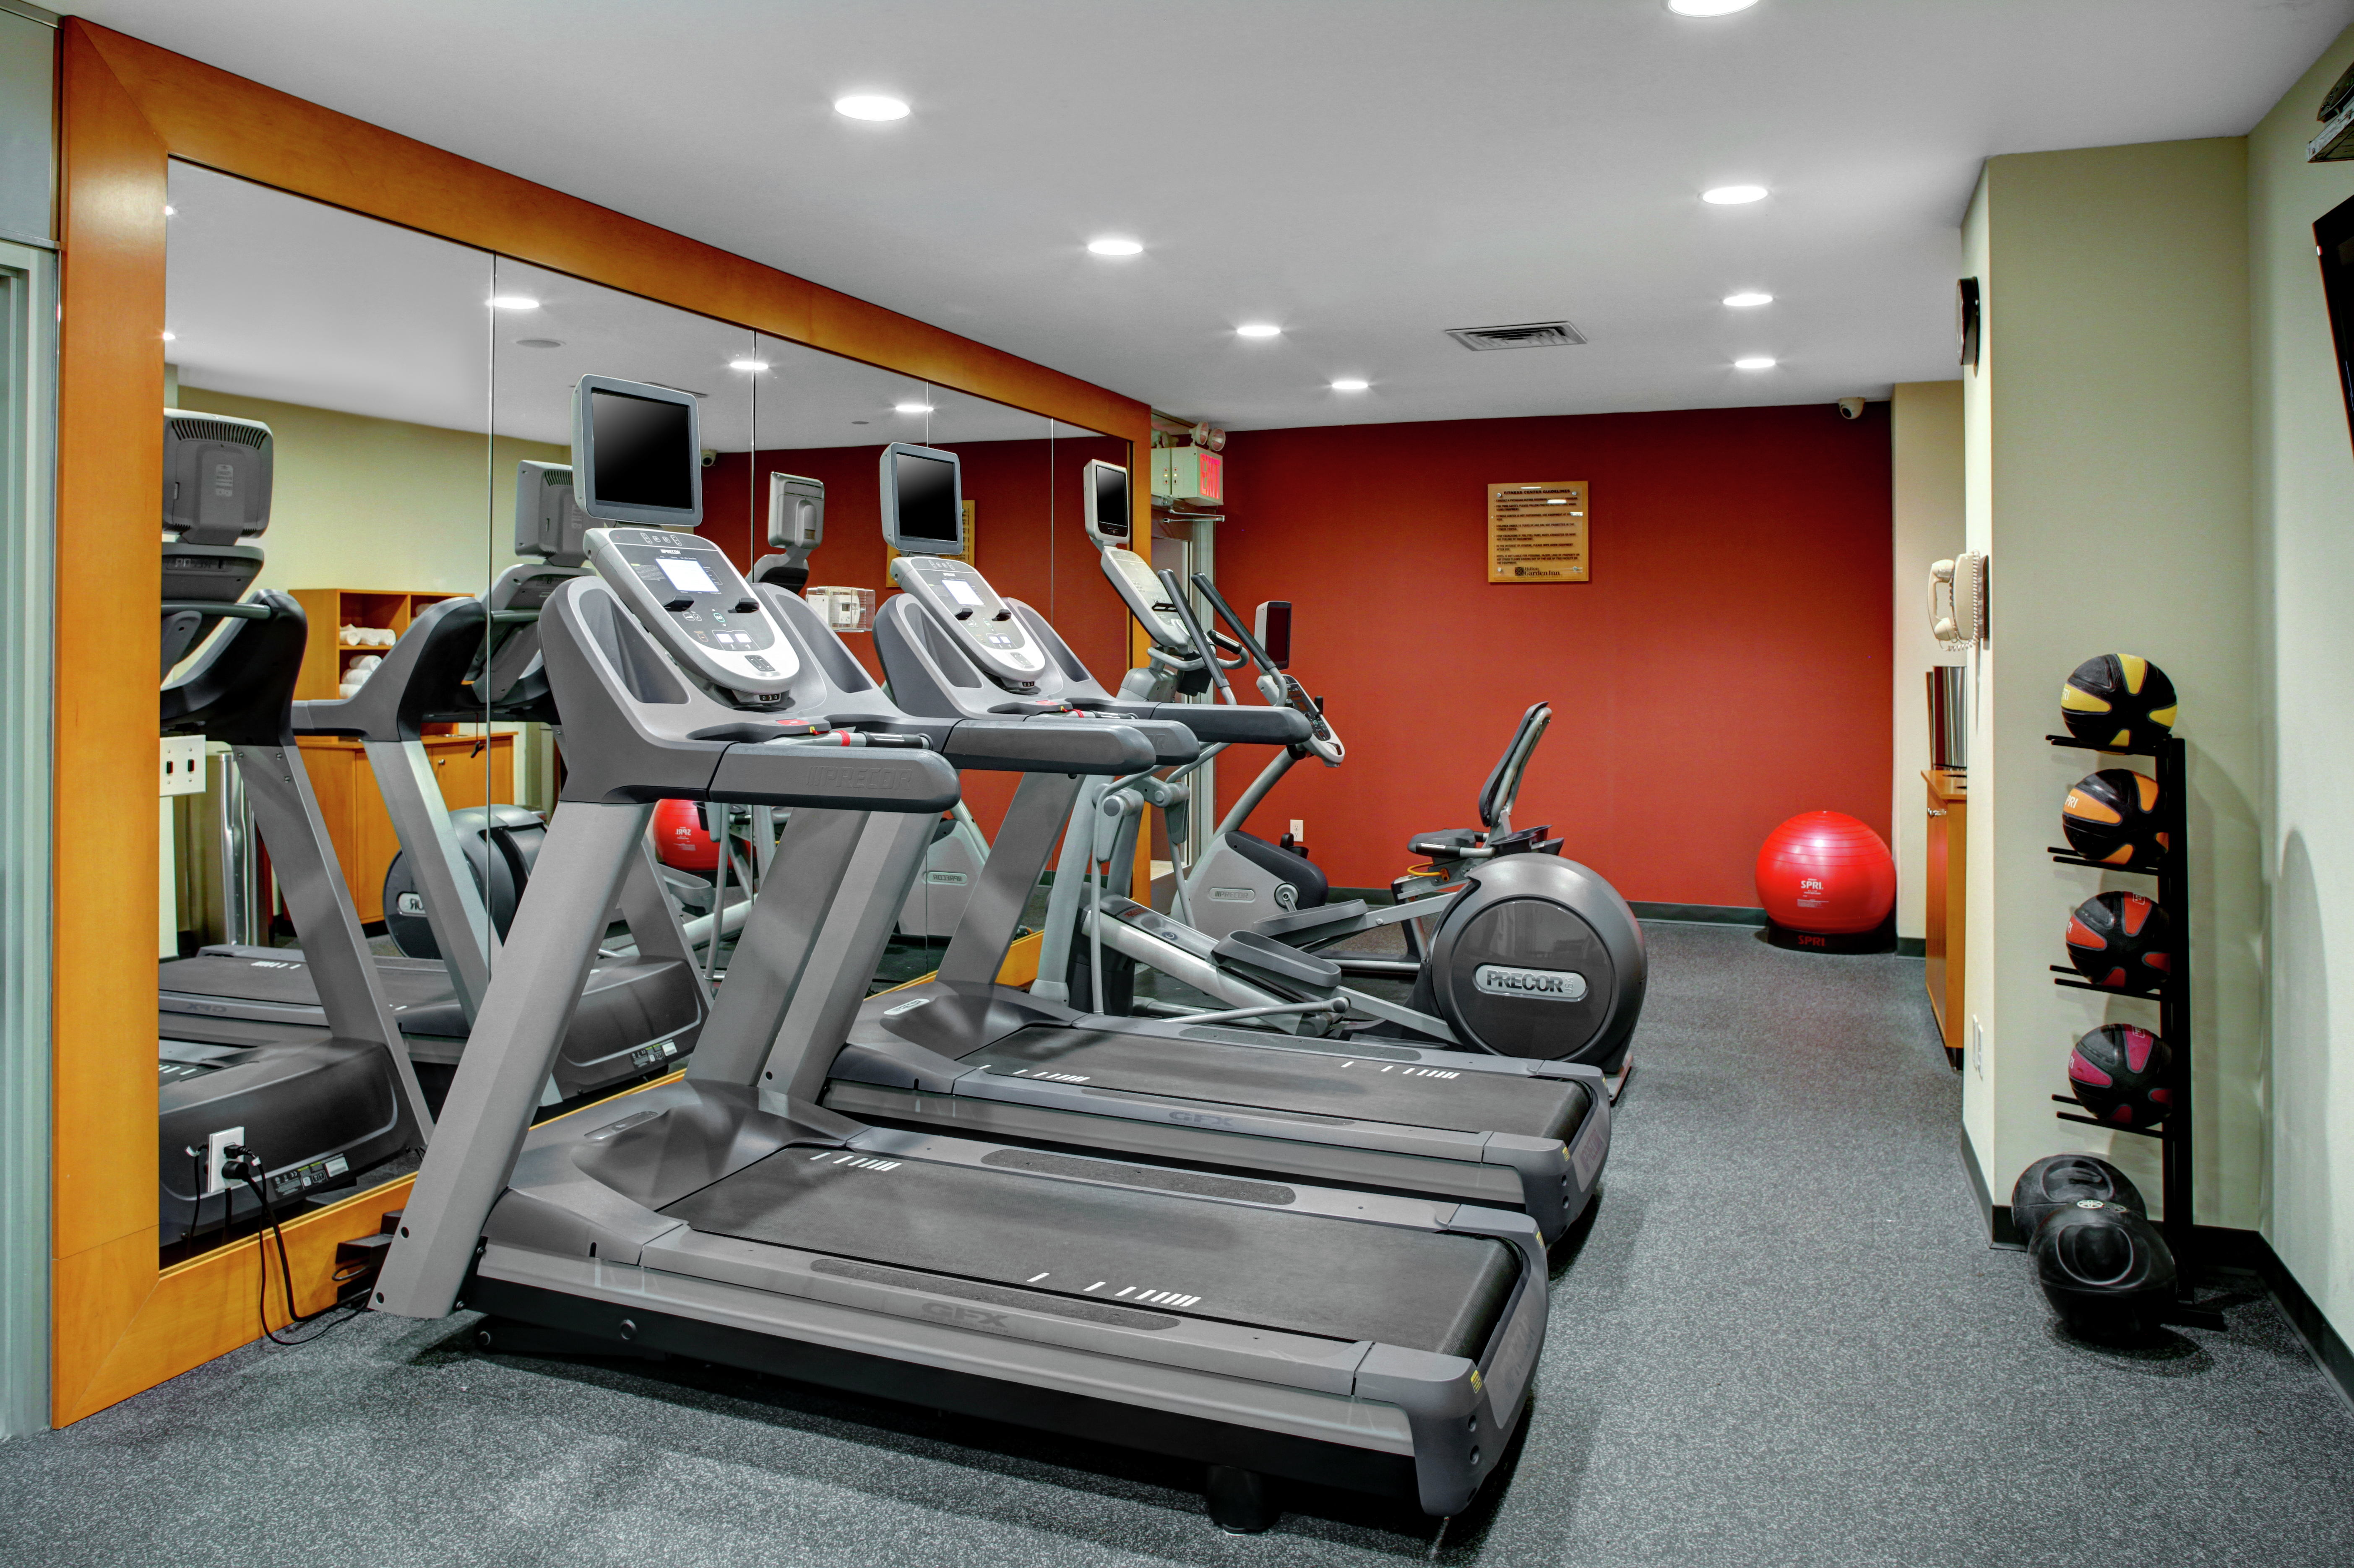 Fitness Center With Mirrored Wall, Cardio Equipment, Red Stability Ball, and Weight Balls